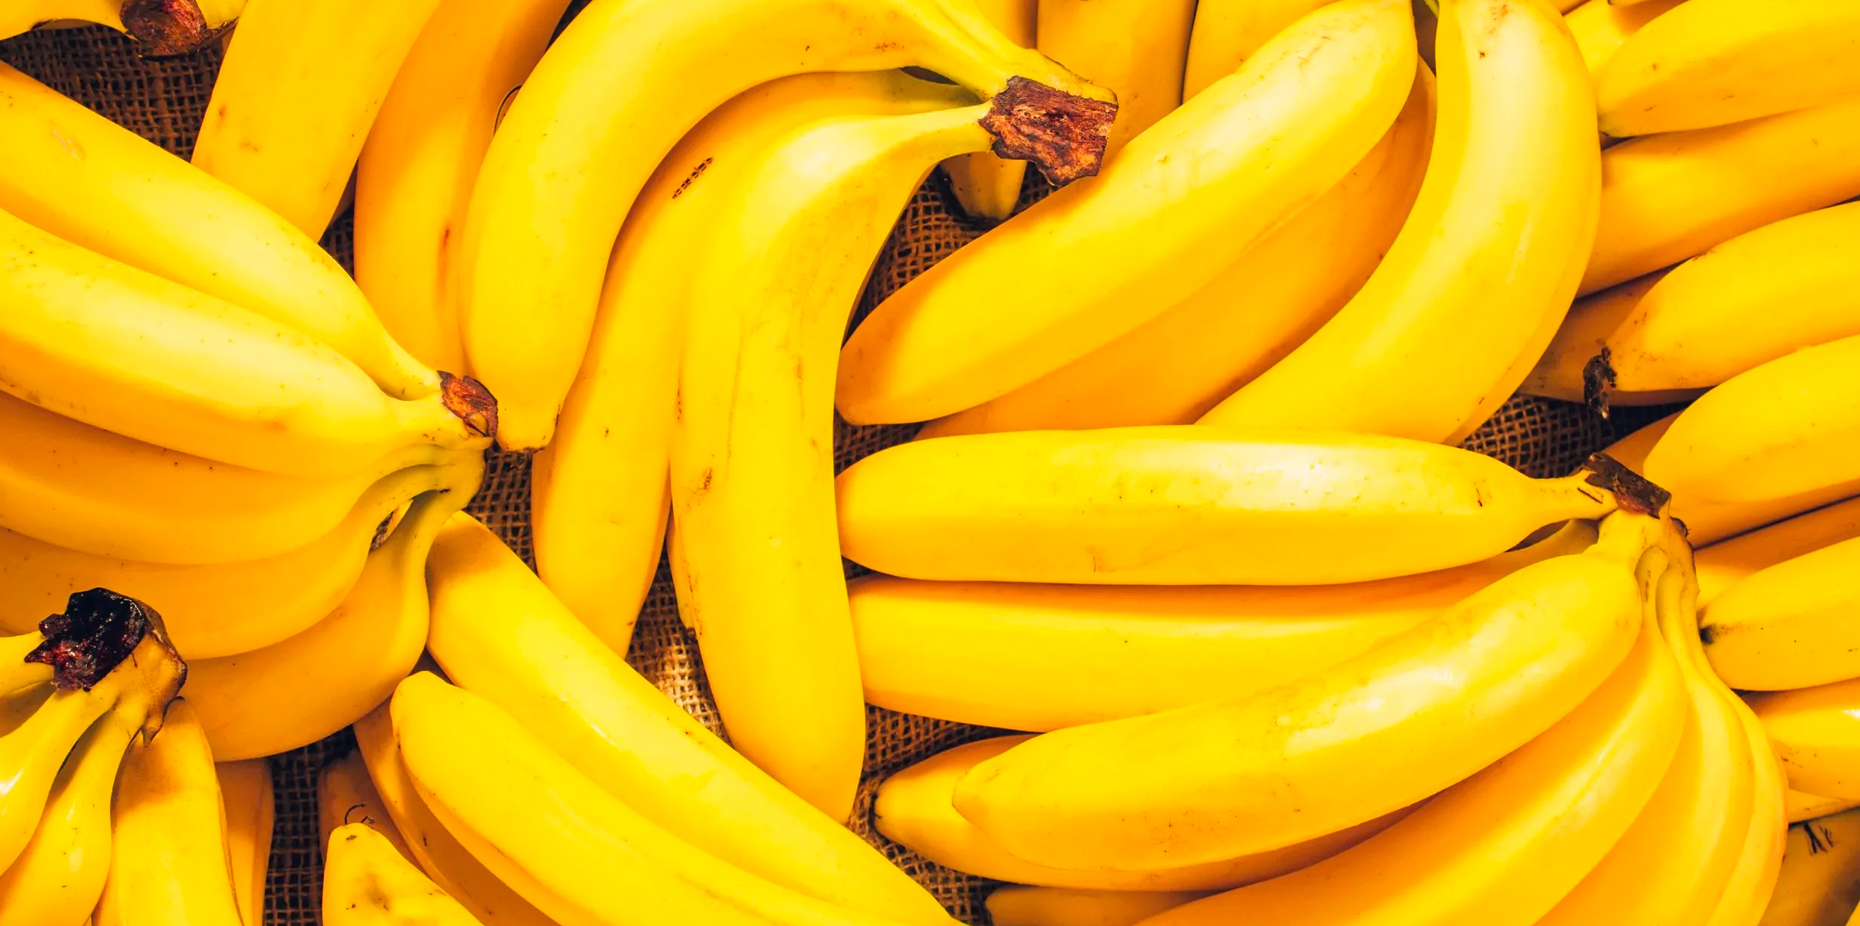 Bananas: Facts, Nutrition, Benefits, and More